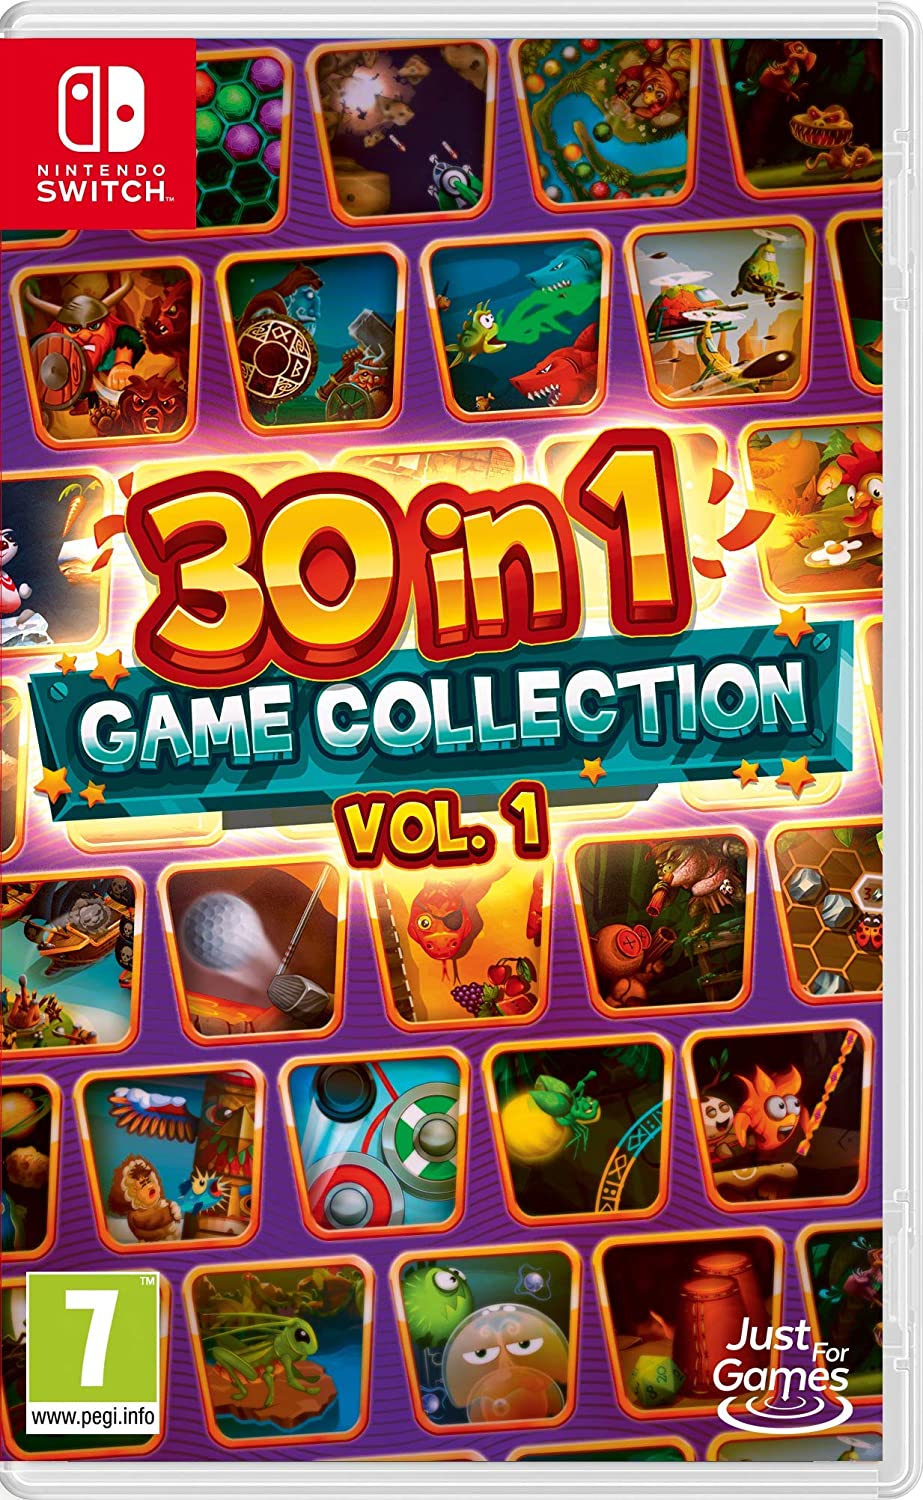 30-in-1 Game Collection Vol. 1 – Digital Bards